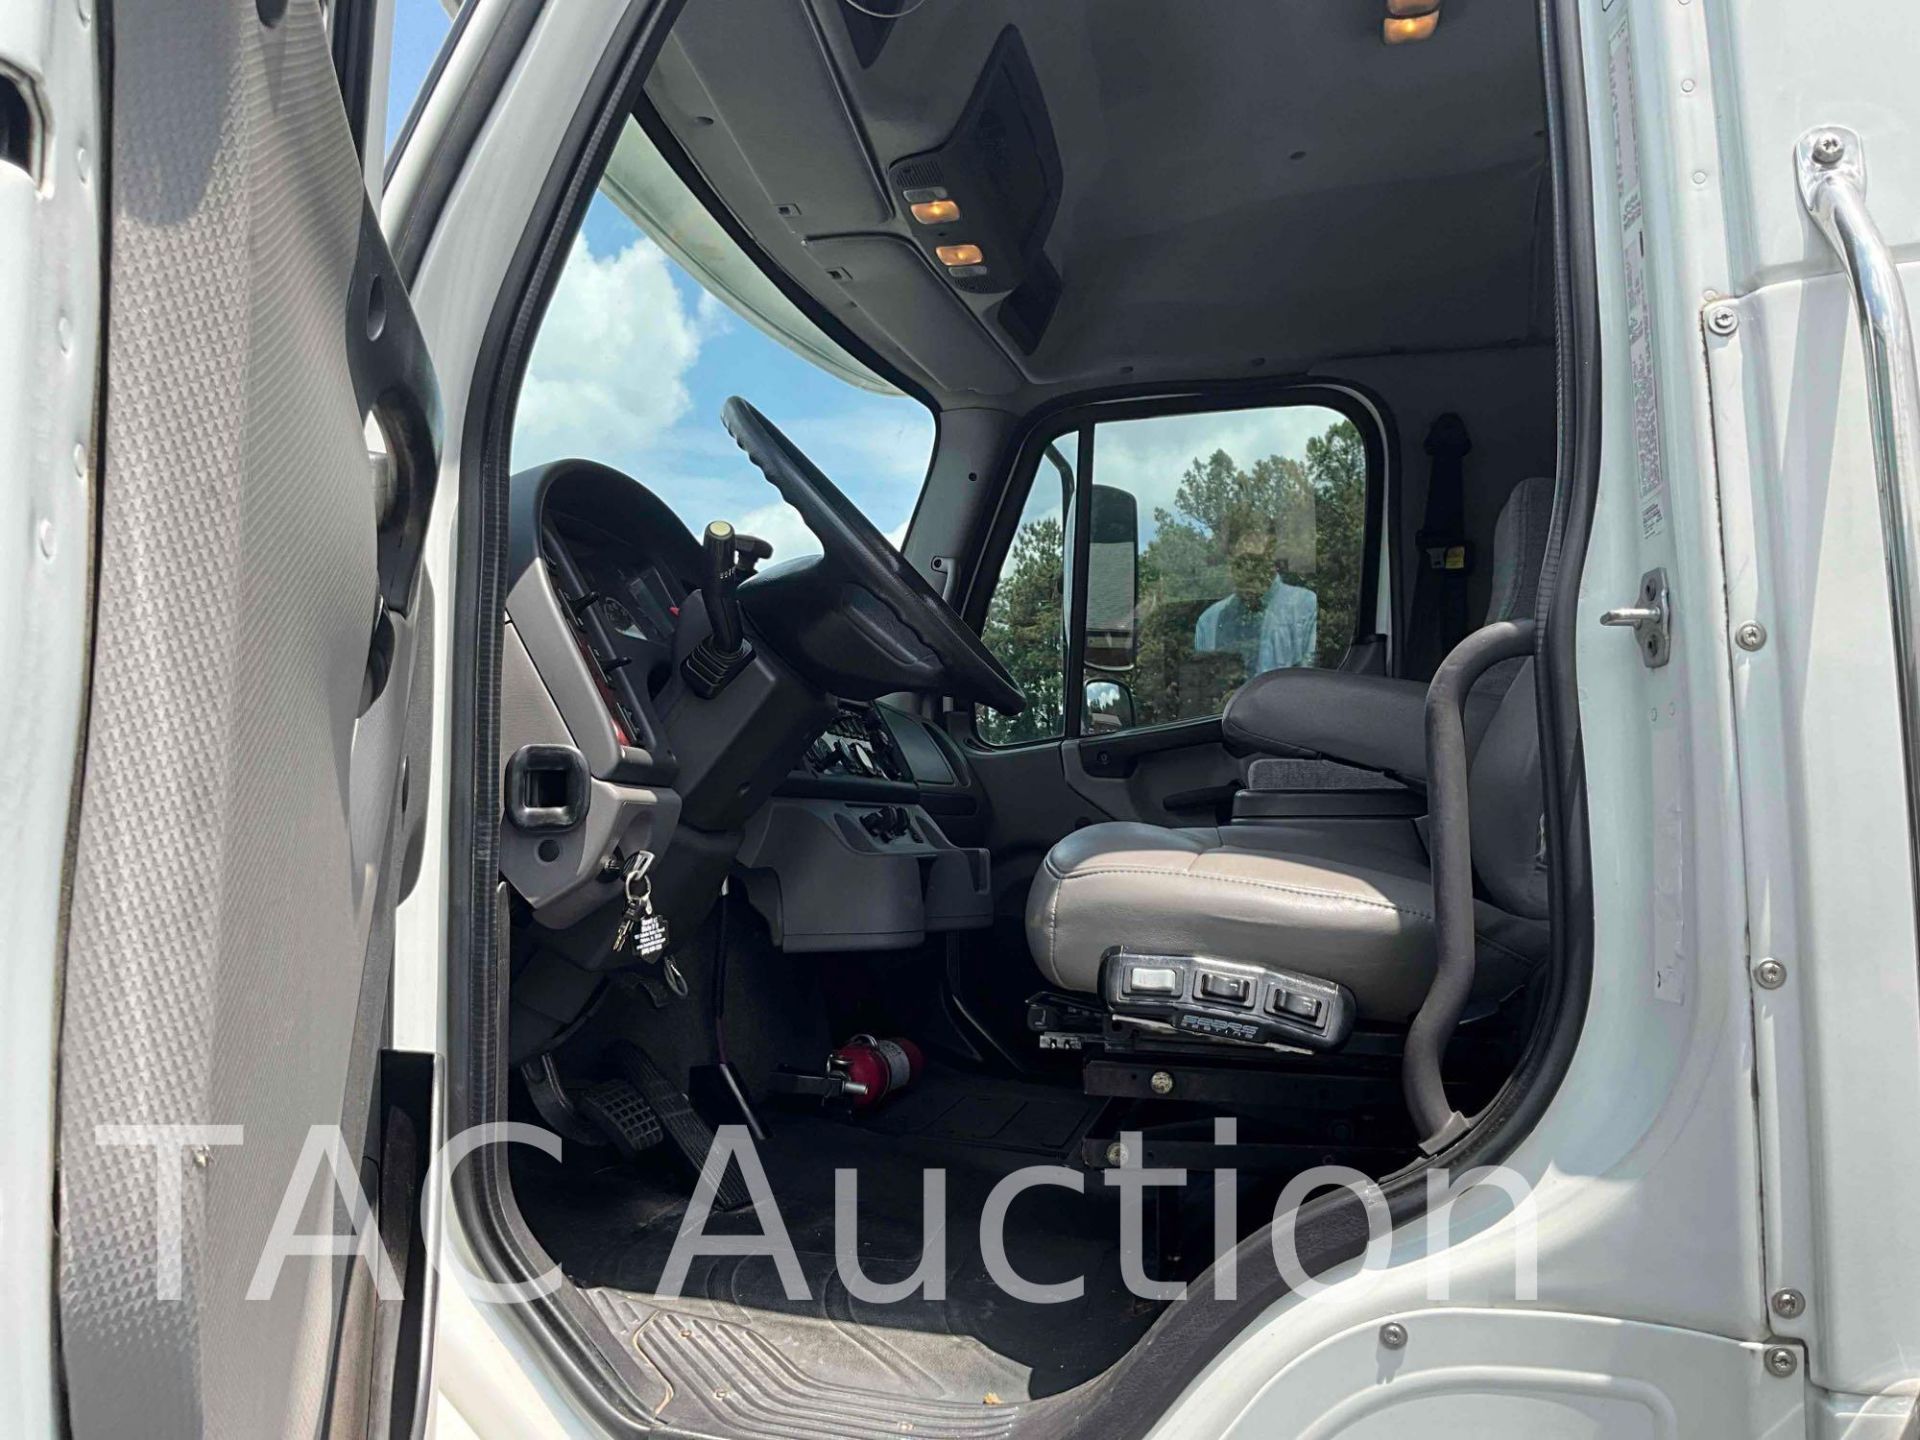 2014 Freightliner M2 Crew Cab Rollback Truck - Image 14 of 71